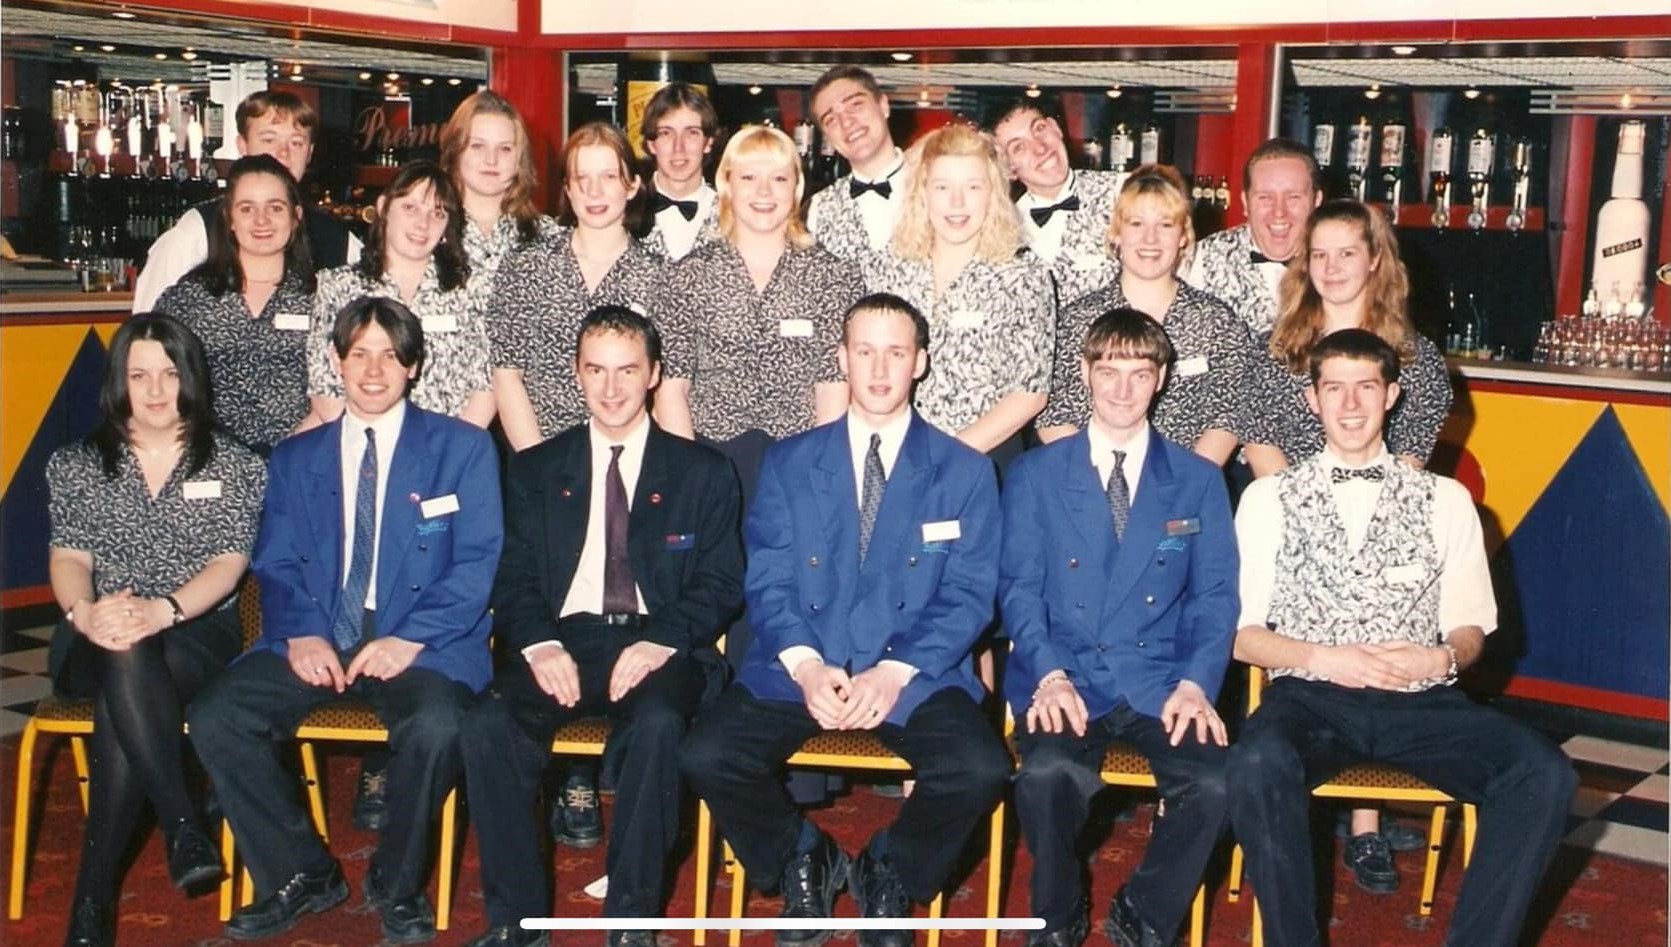 Barnums Staff Photos from 1997/98